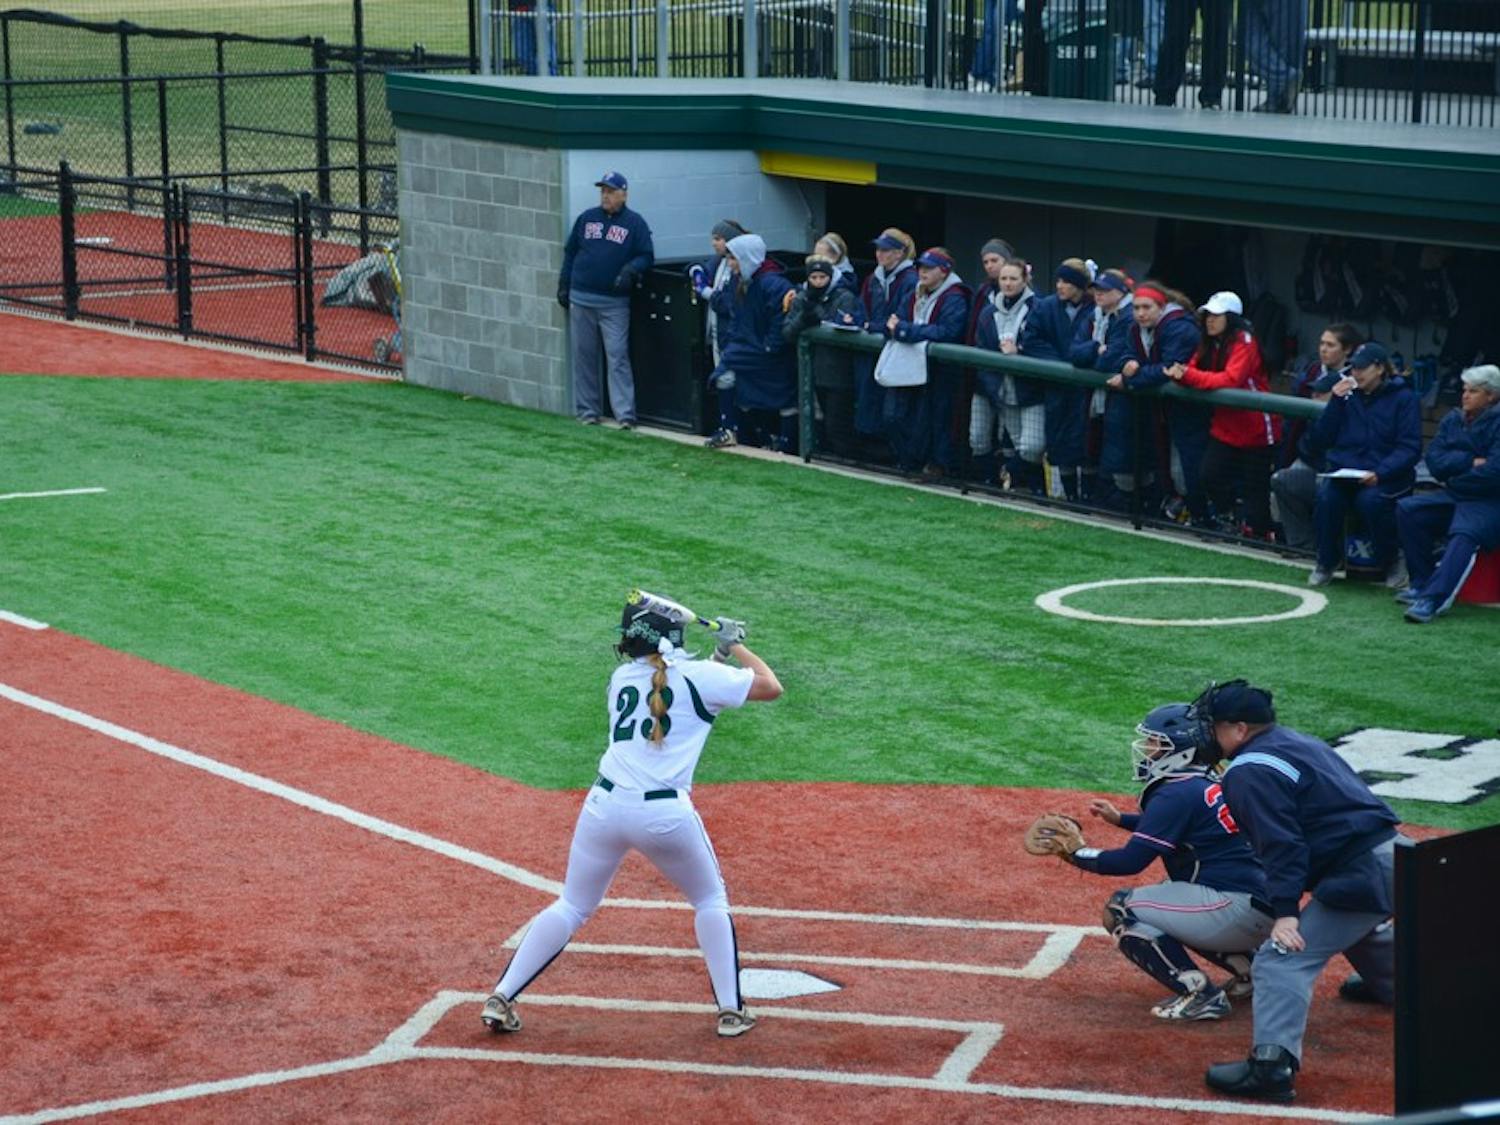 Softball pick up its first two losses in Ivy League play this past weekend against Yale University.